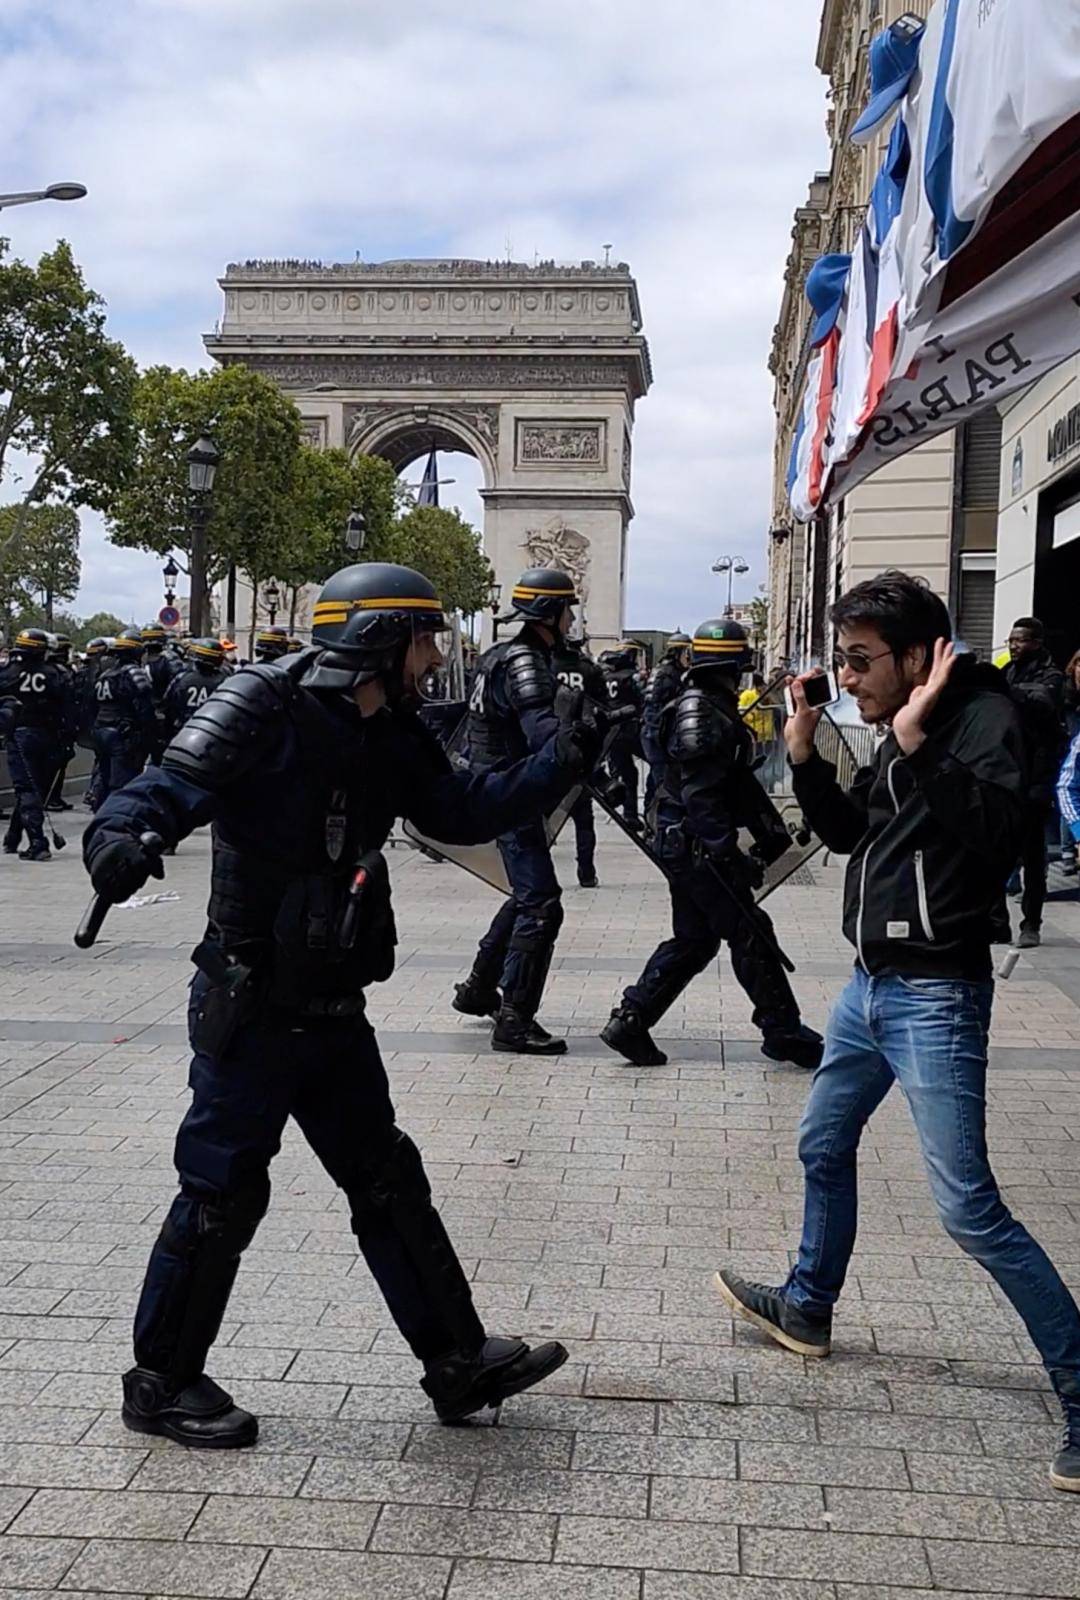 A police officer gestures to a man during clashes with protesters on Champs Elysees in Paris